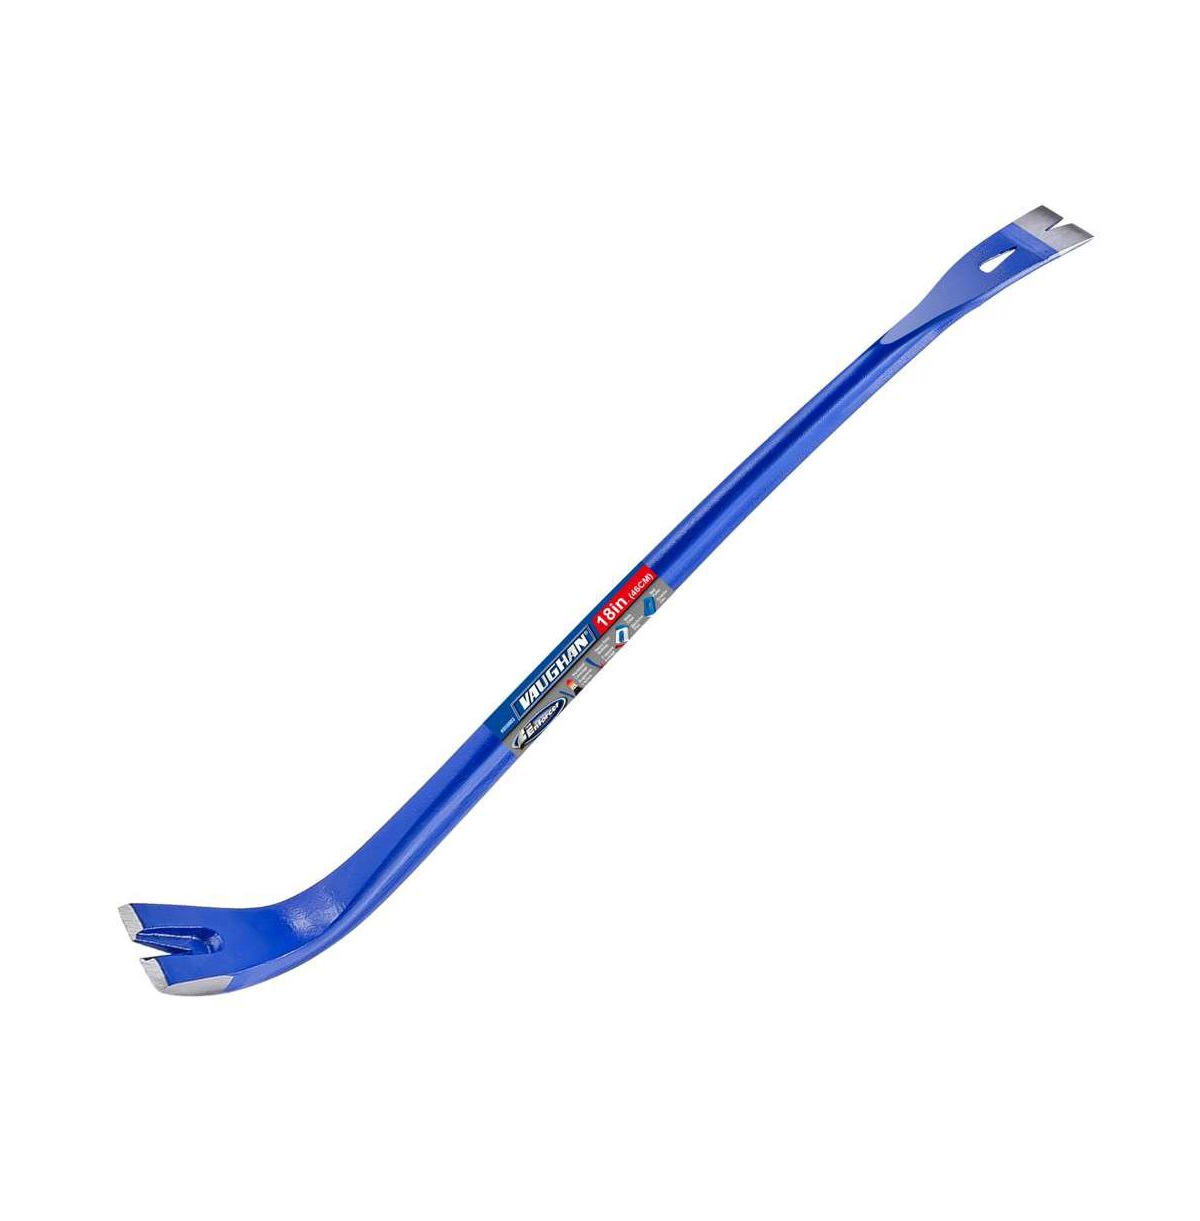 18 Inch Pry Crow Bar with Nail Puller and Curved Handle - Blue